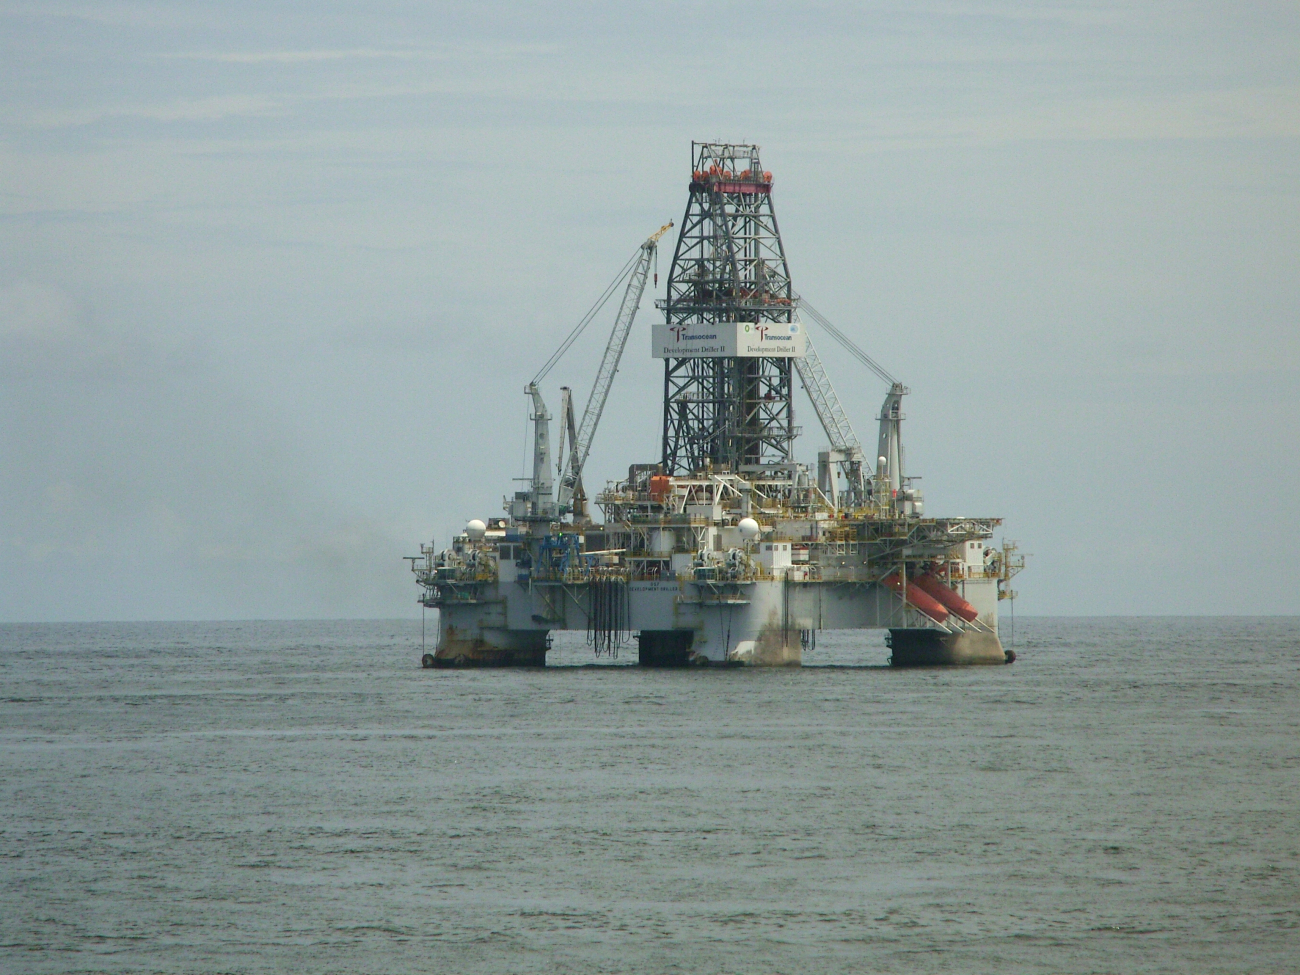 Transocean DEVELOPMENT DRILLER II on site at the Deepwater Horizondisaster well containment efforts